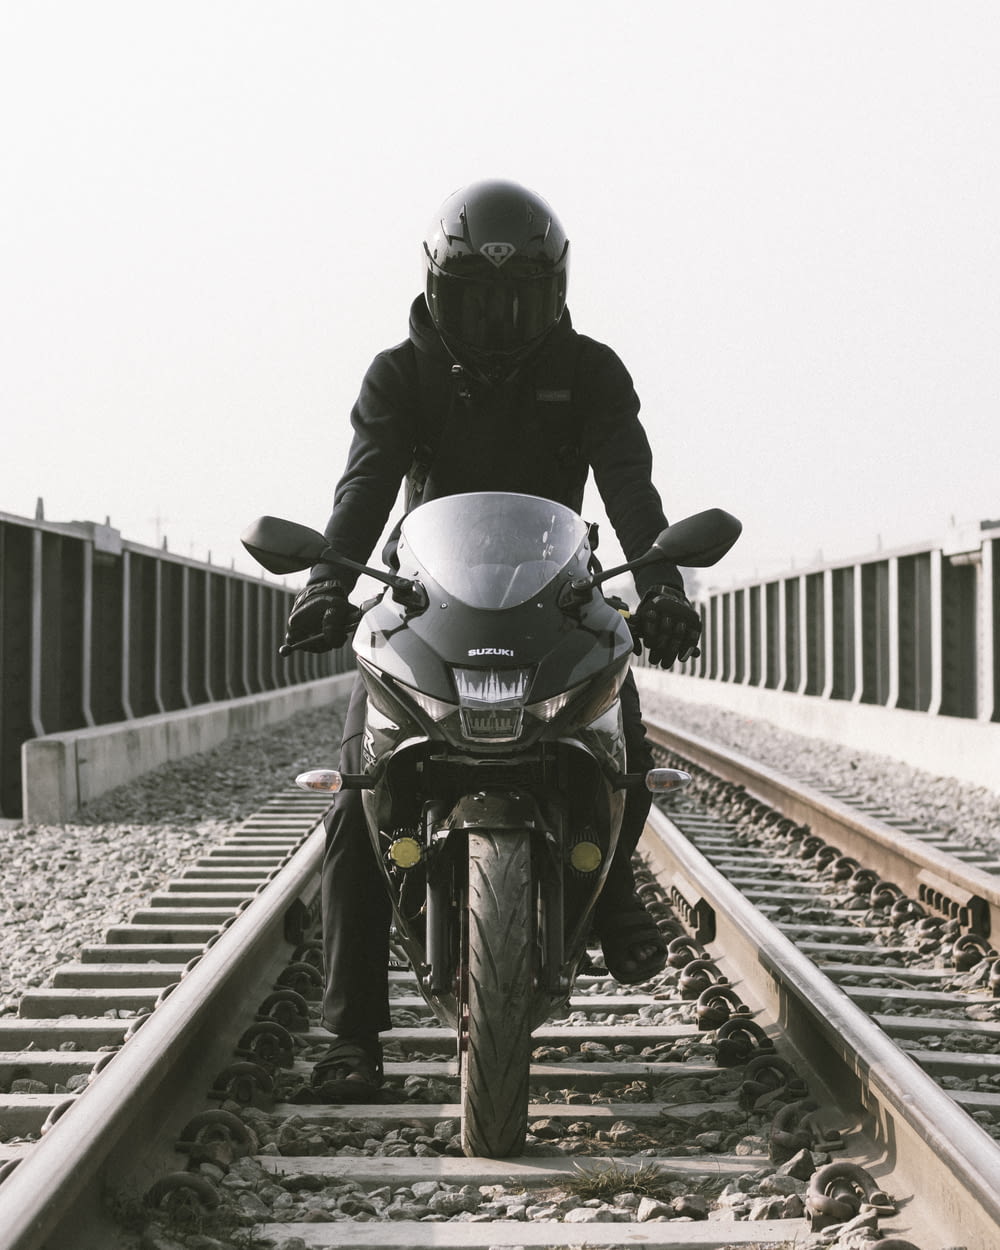 a man riding a motorcycle down a train track